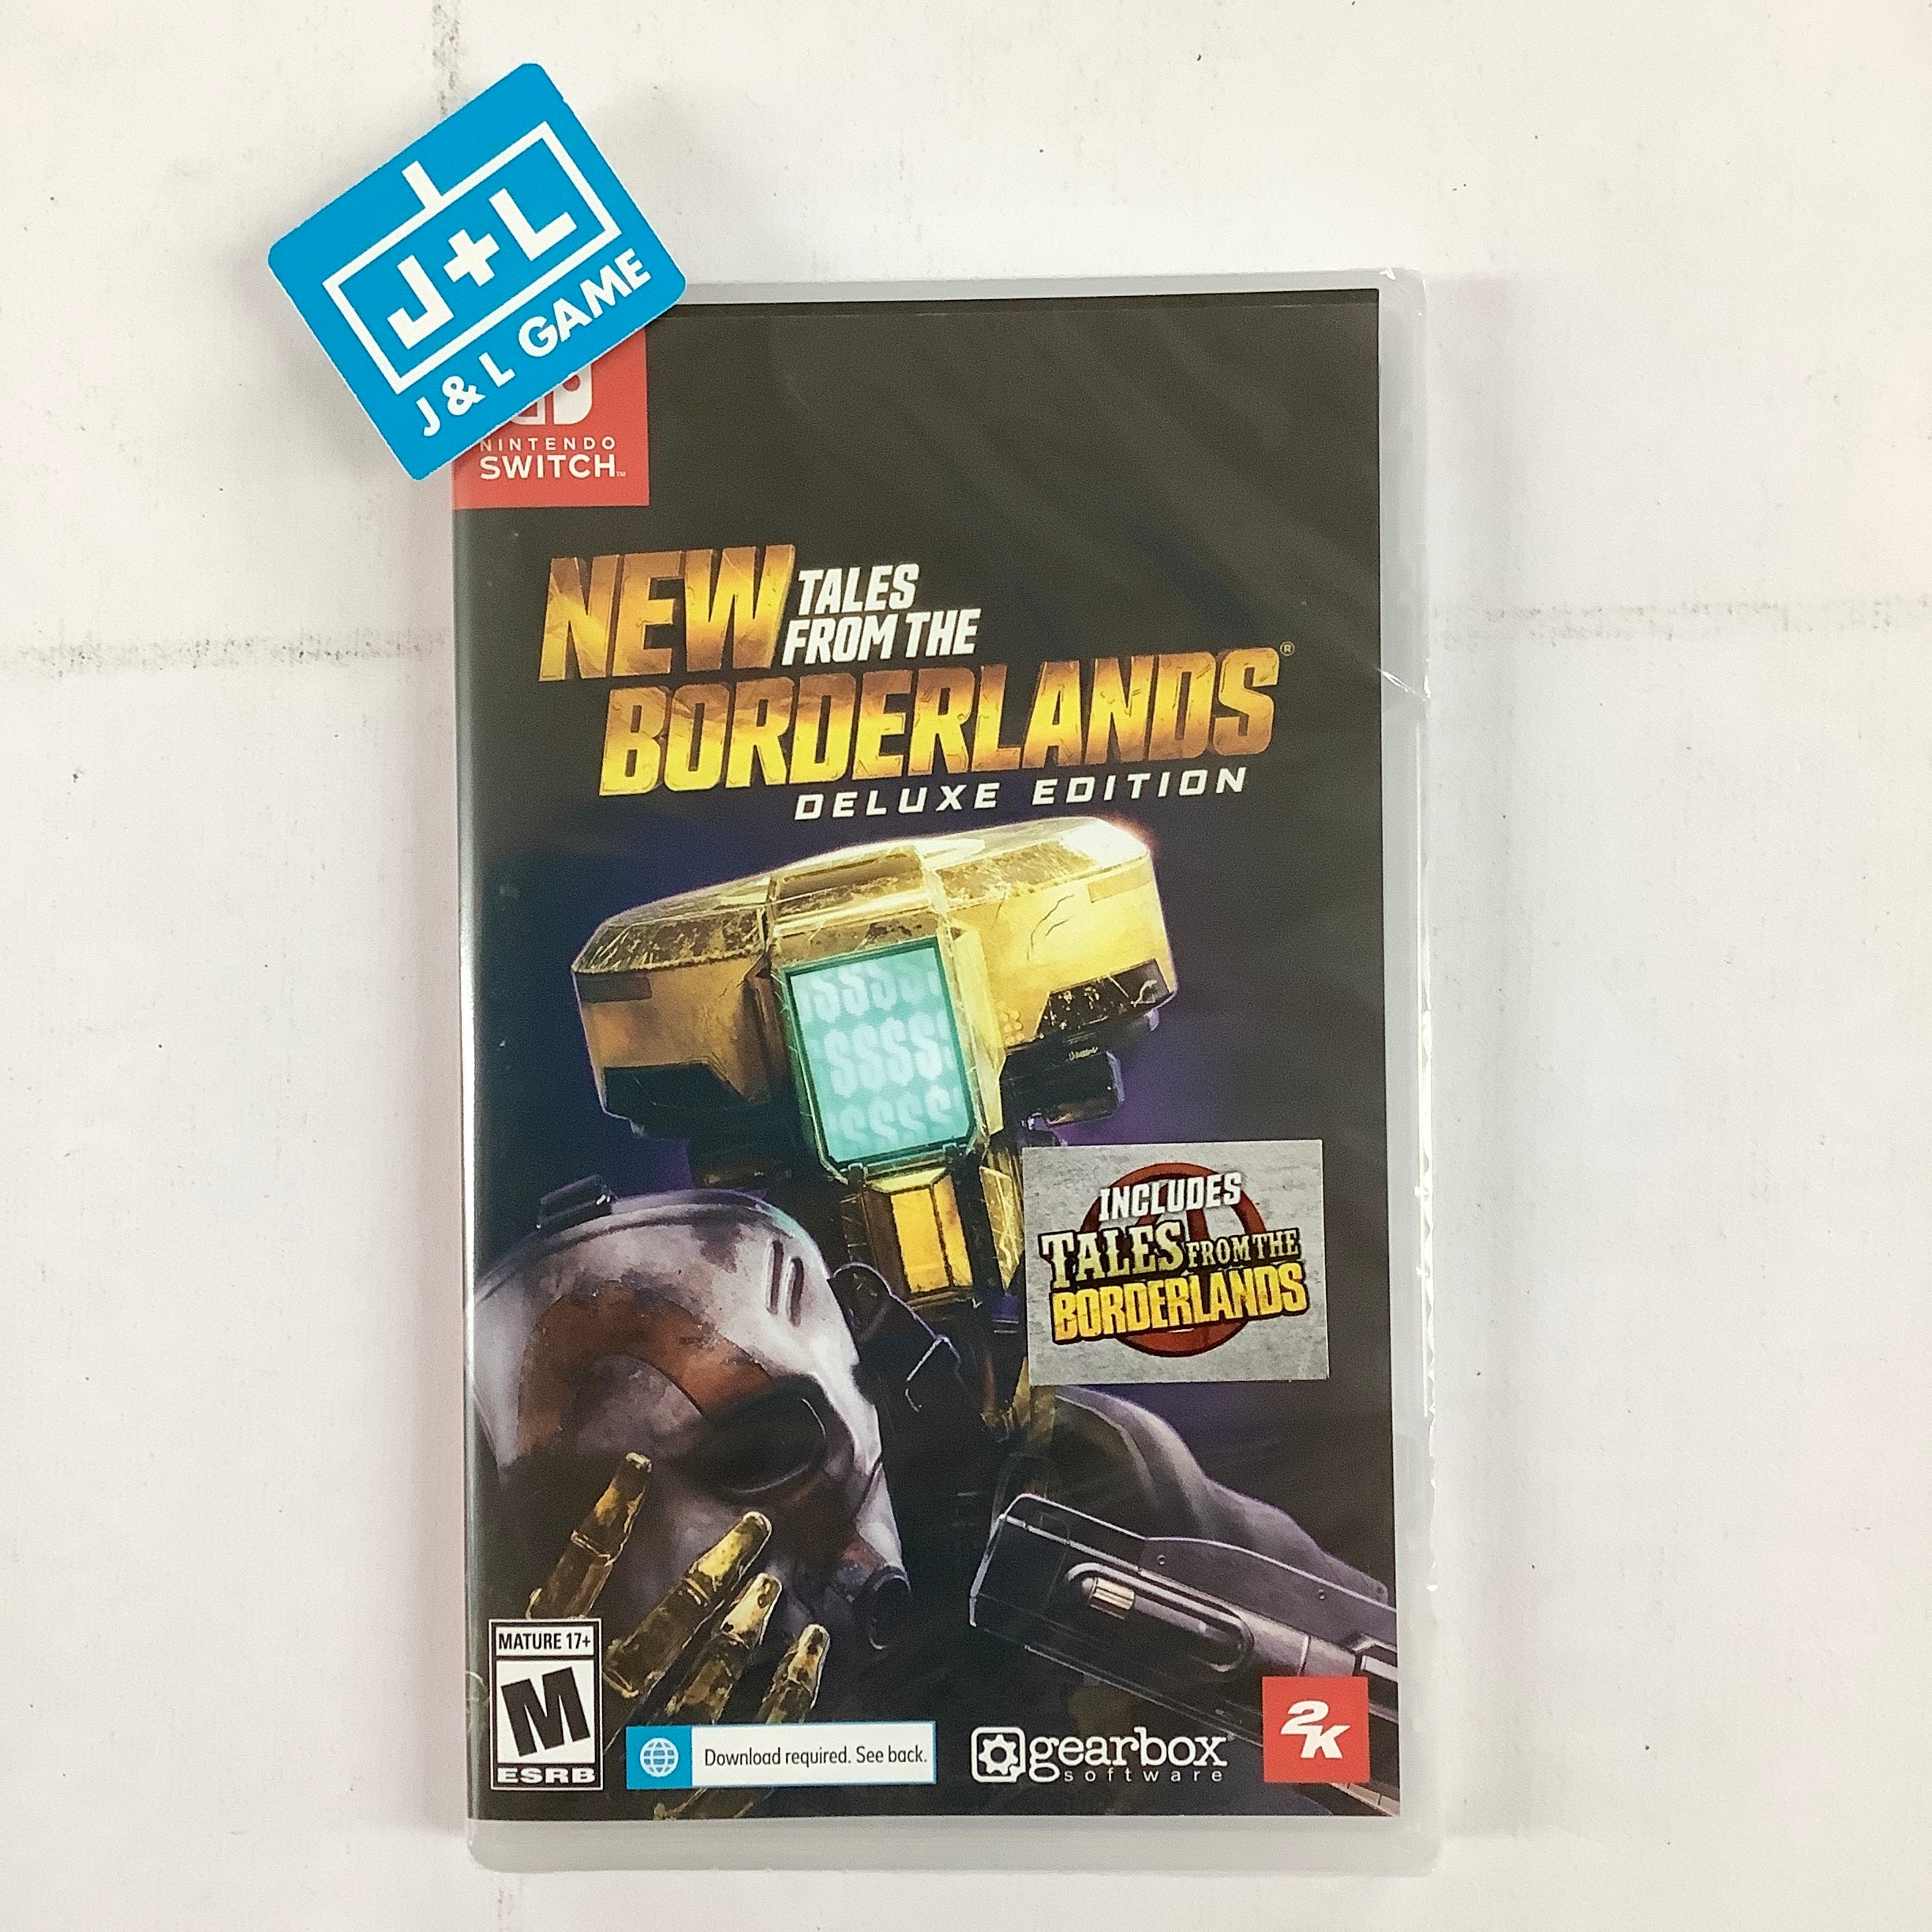 New Tales from the Borderlands (Deluxe Edition) - (NSW) Nintendo Switch Video Games 2K   